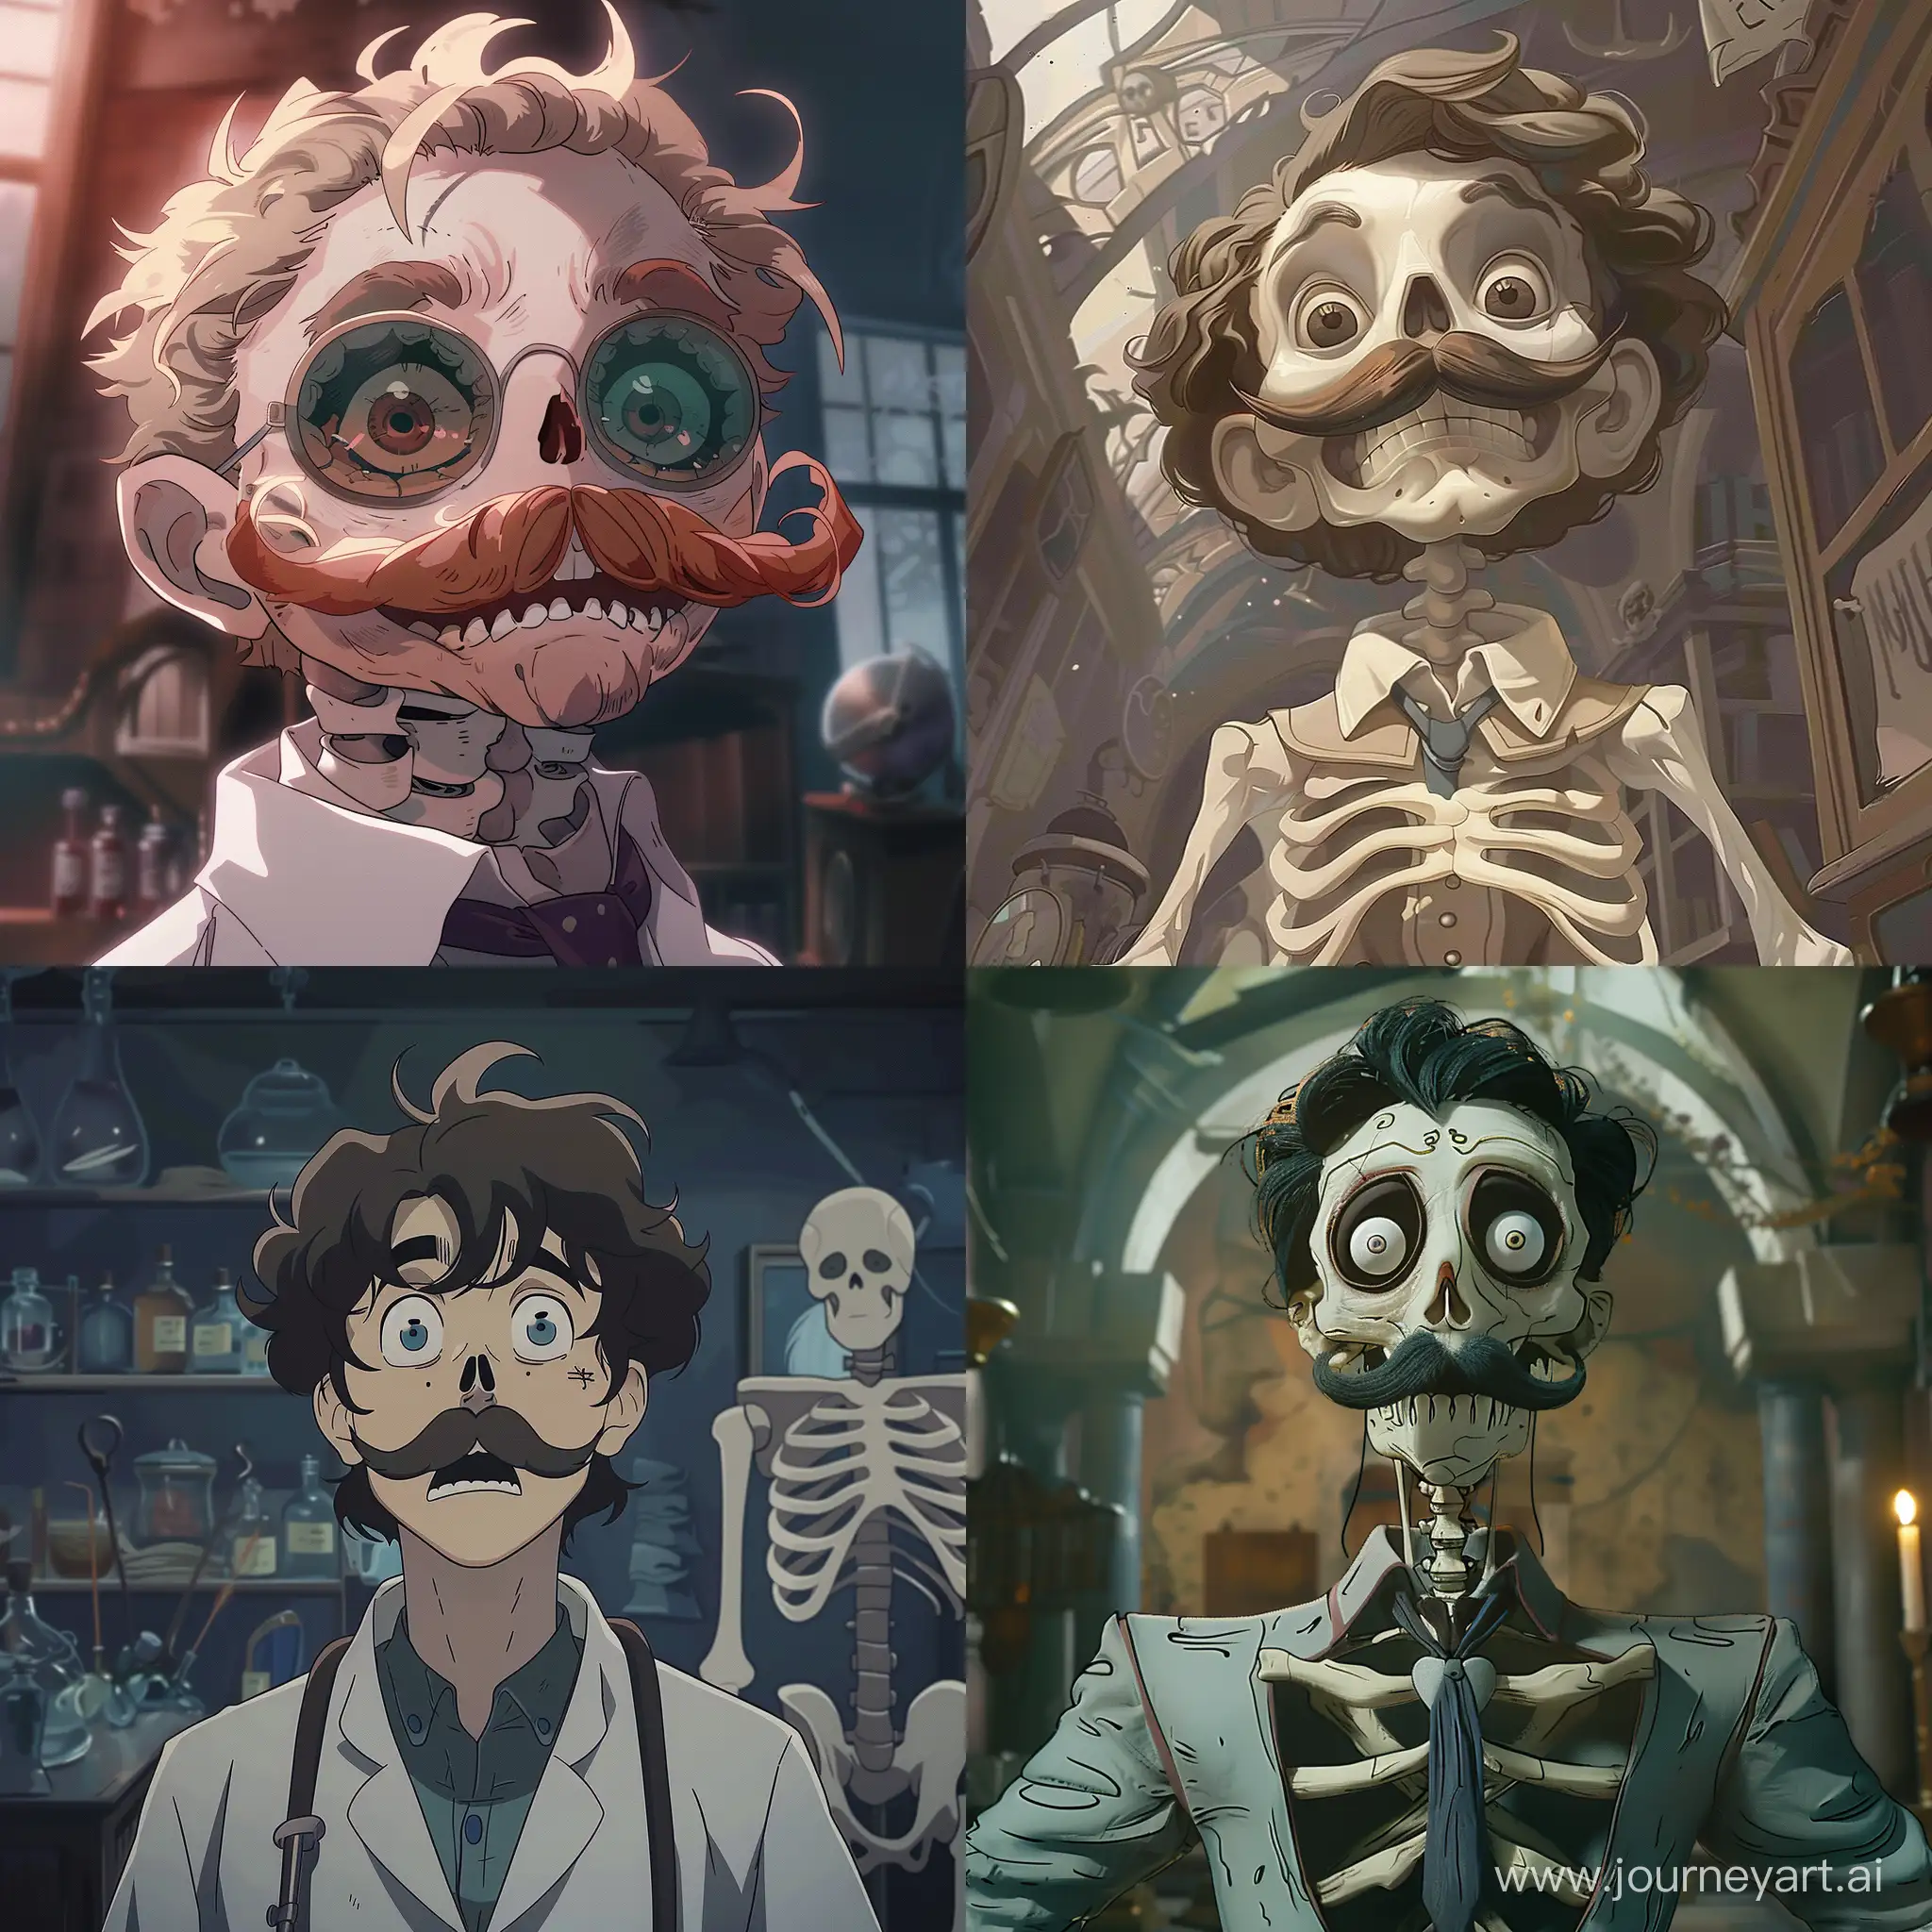 Whimsical-Animestyle-Little-Doctor-Bones-with-a-Moustache